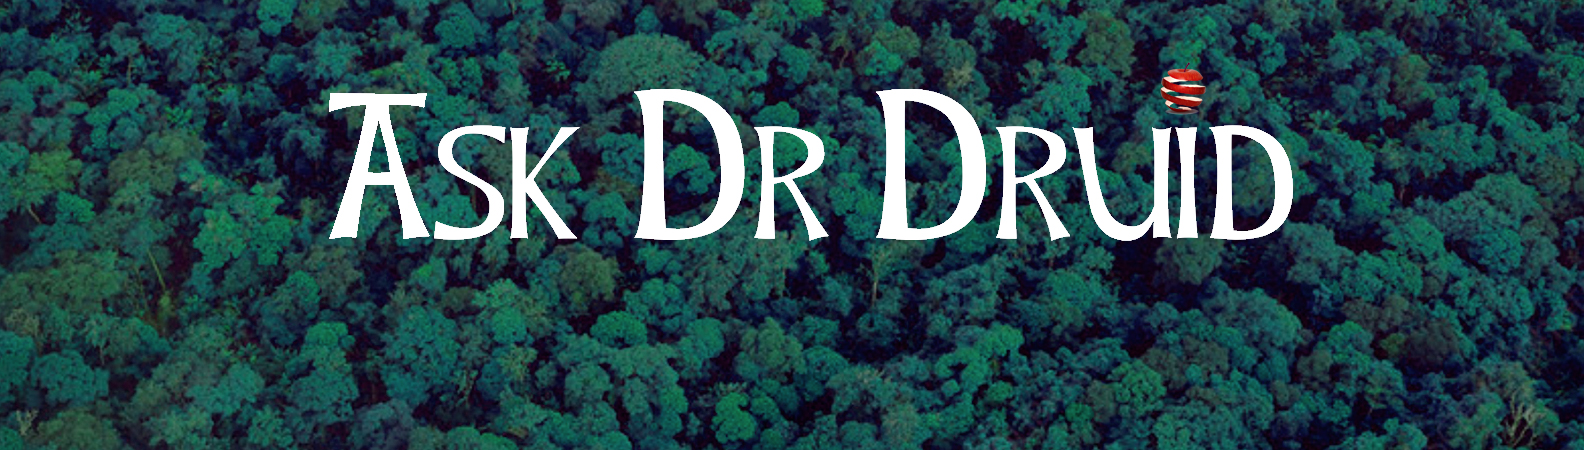 Ask Dr Druid